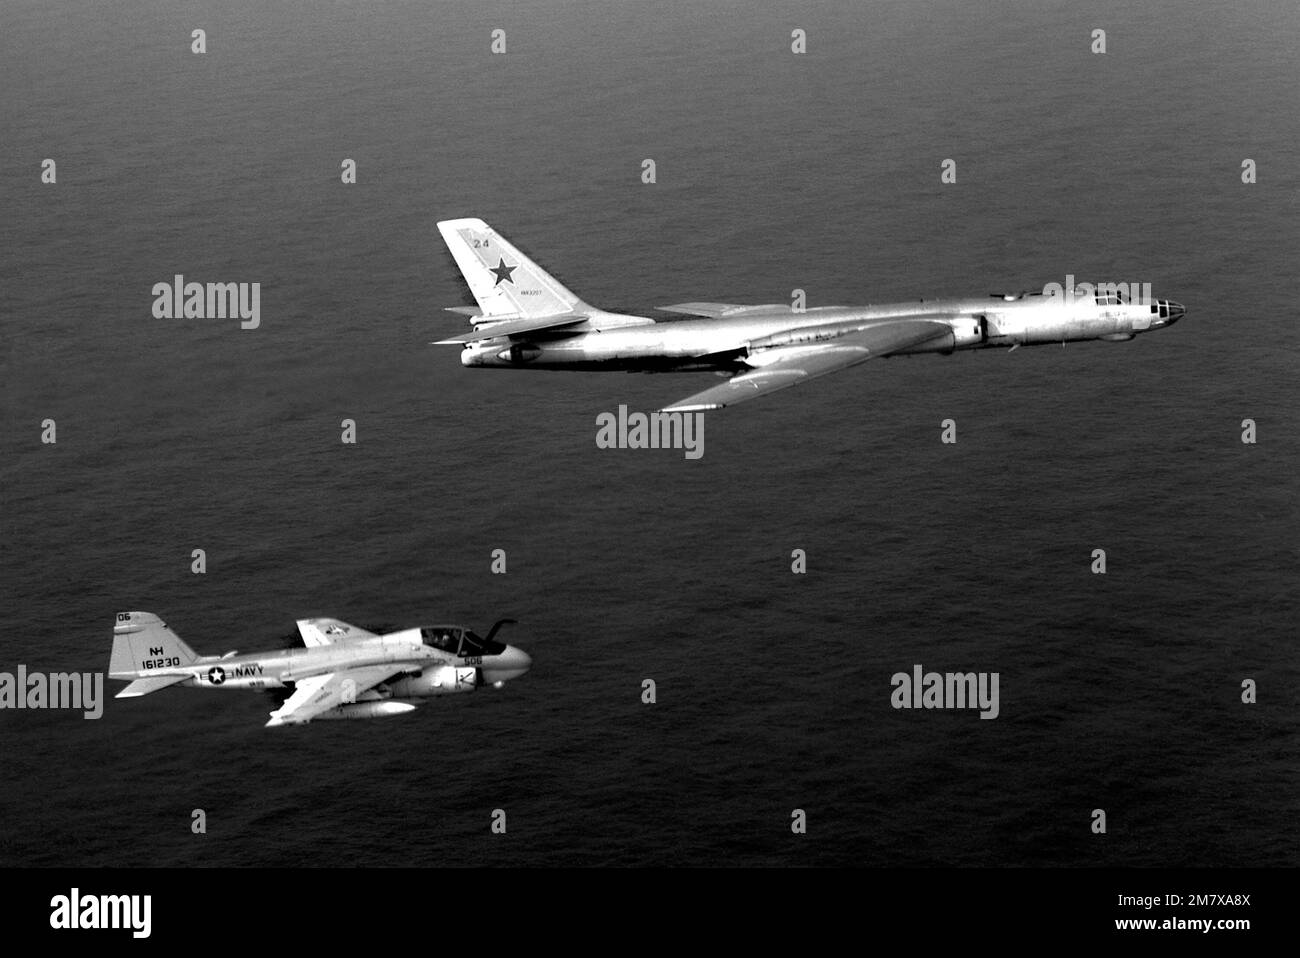 An air-to-air right side view of a Medium Attack Squadron 95 (VA-95) A-6E Intruder aircraft, assigned to the nuclear-powered aircraft carrier USS ENTERPRISE (CVN 65), escorting a Soviet Tu-16 Badger aircraft. Country: Pacific Ocean (POC) Stock Photo